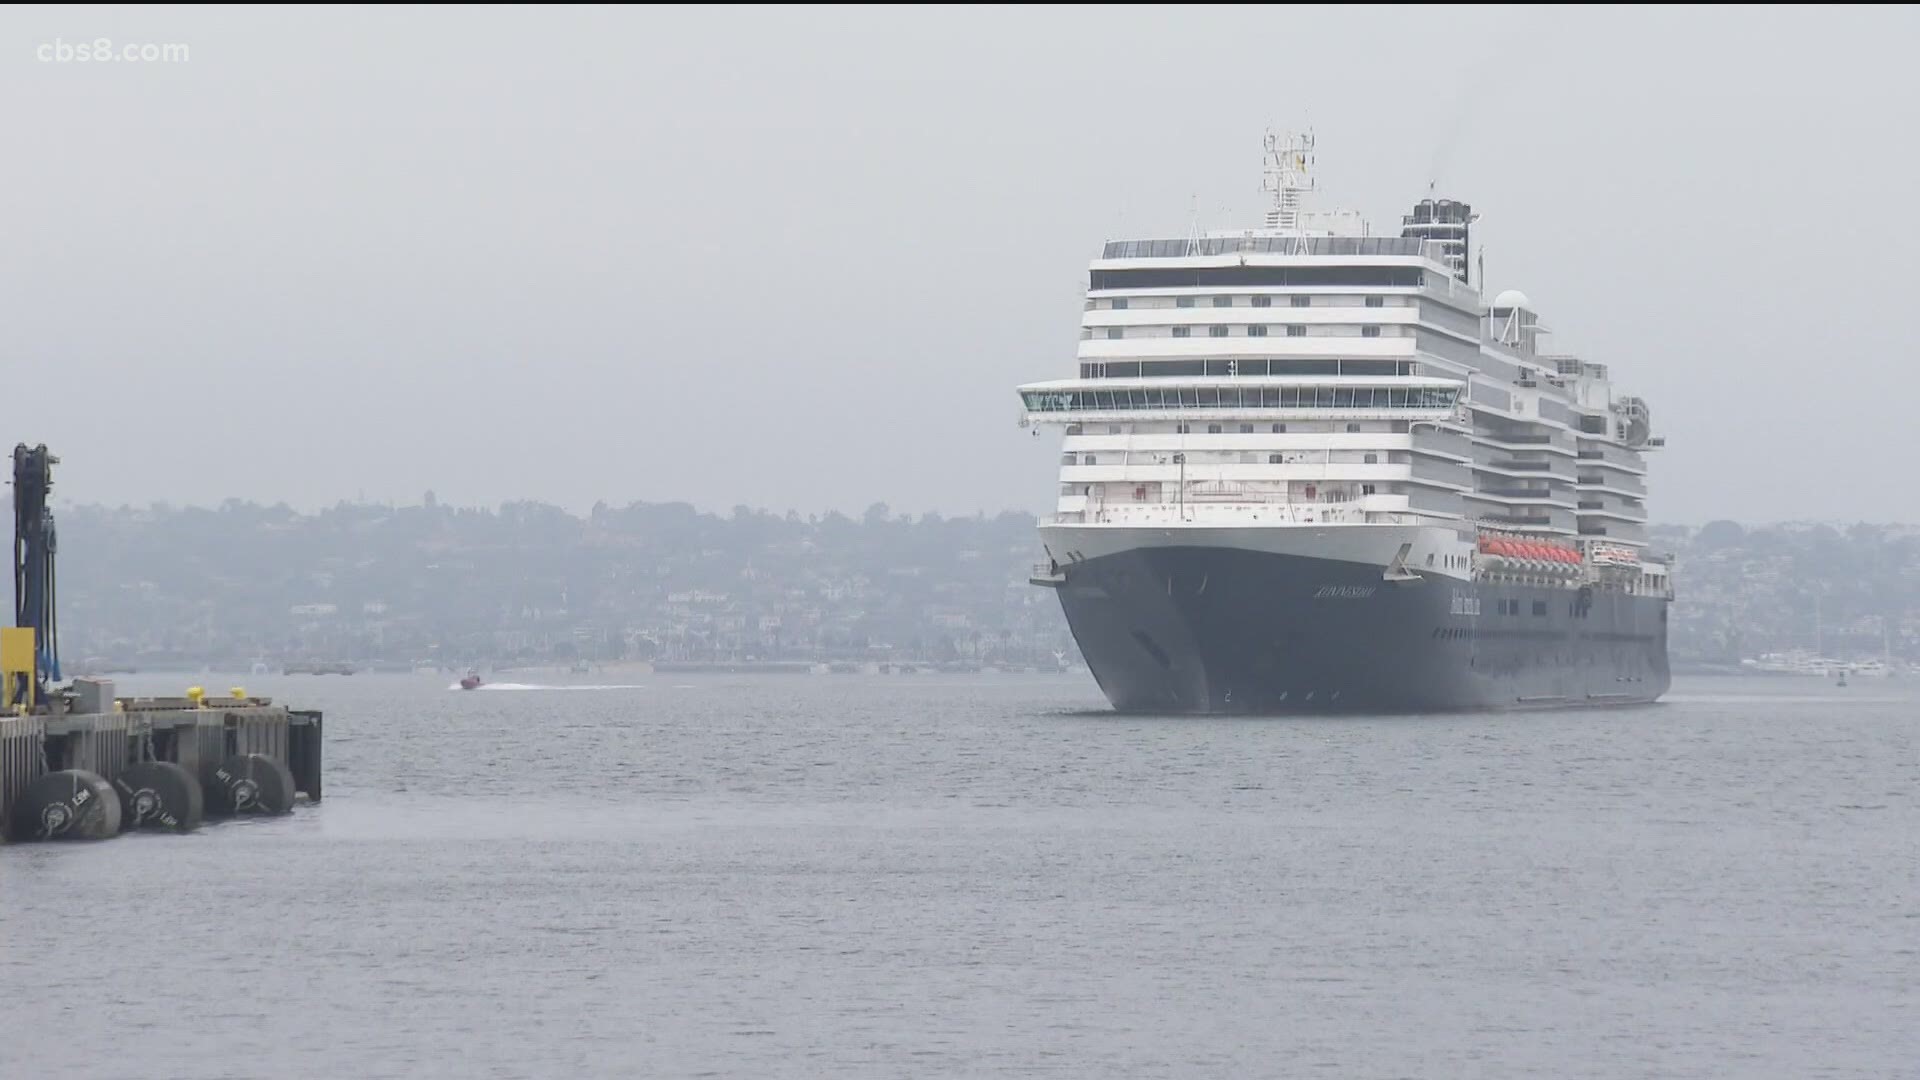 San Diego lost an estimated $280 million in economic impact from the cruise industry alone due to the pandemic